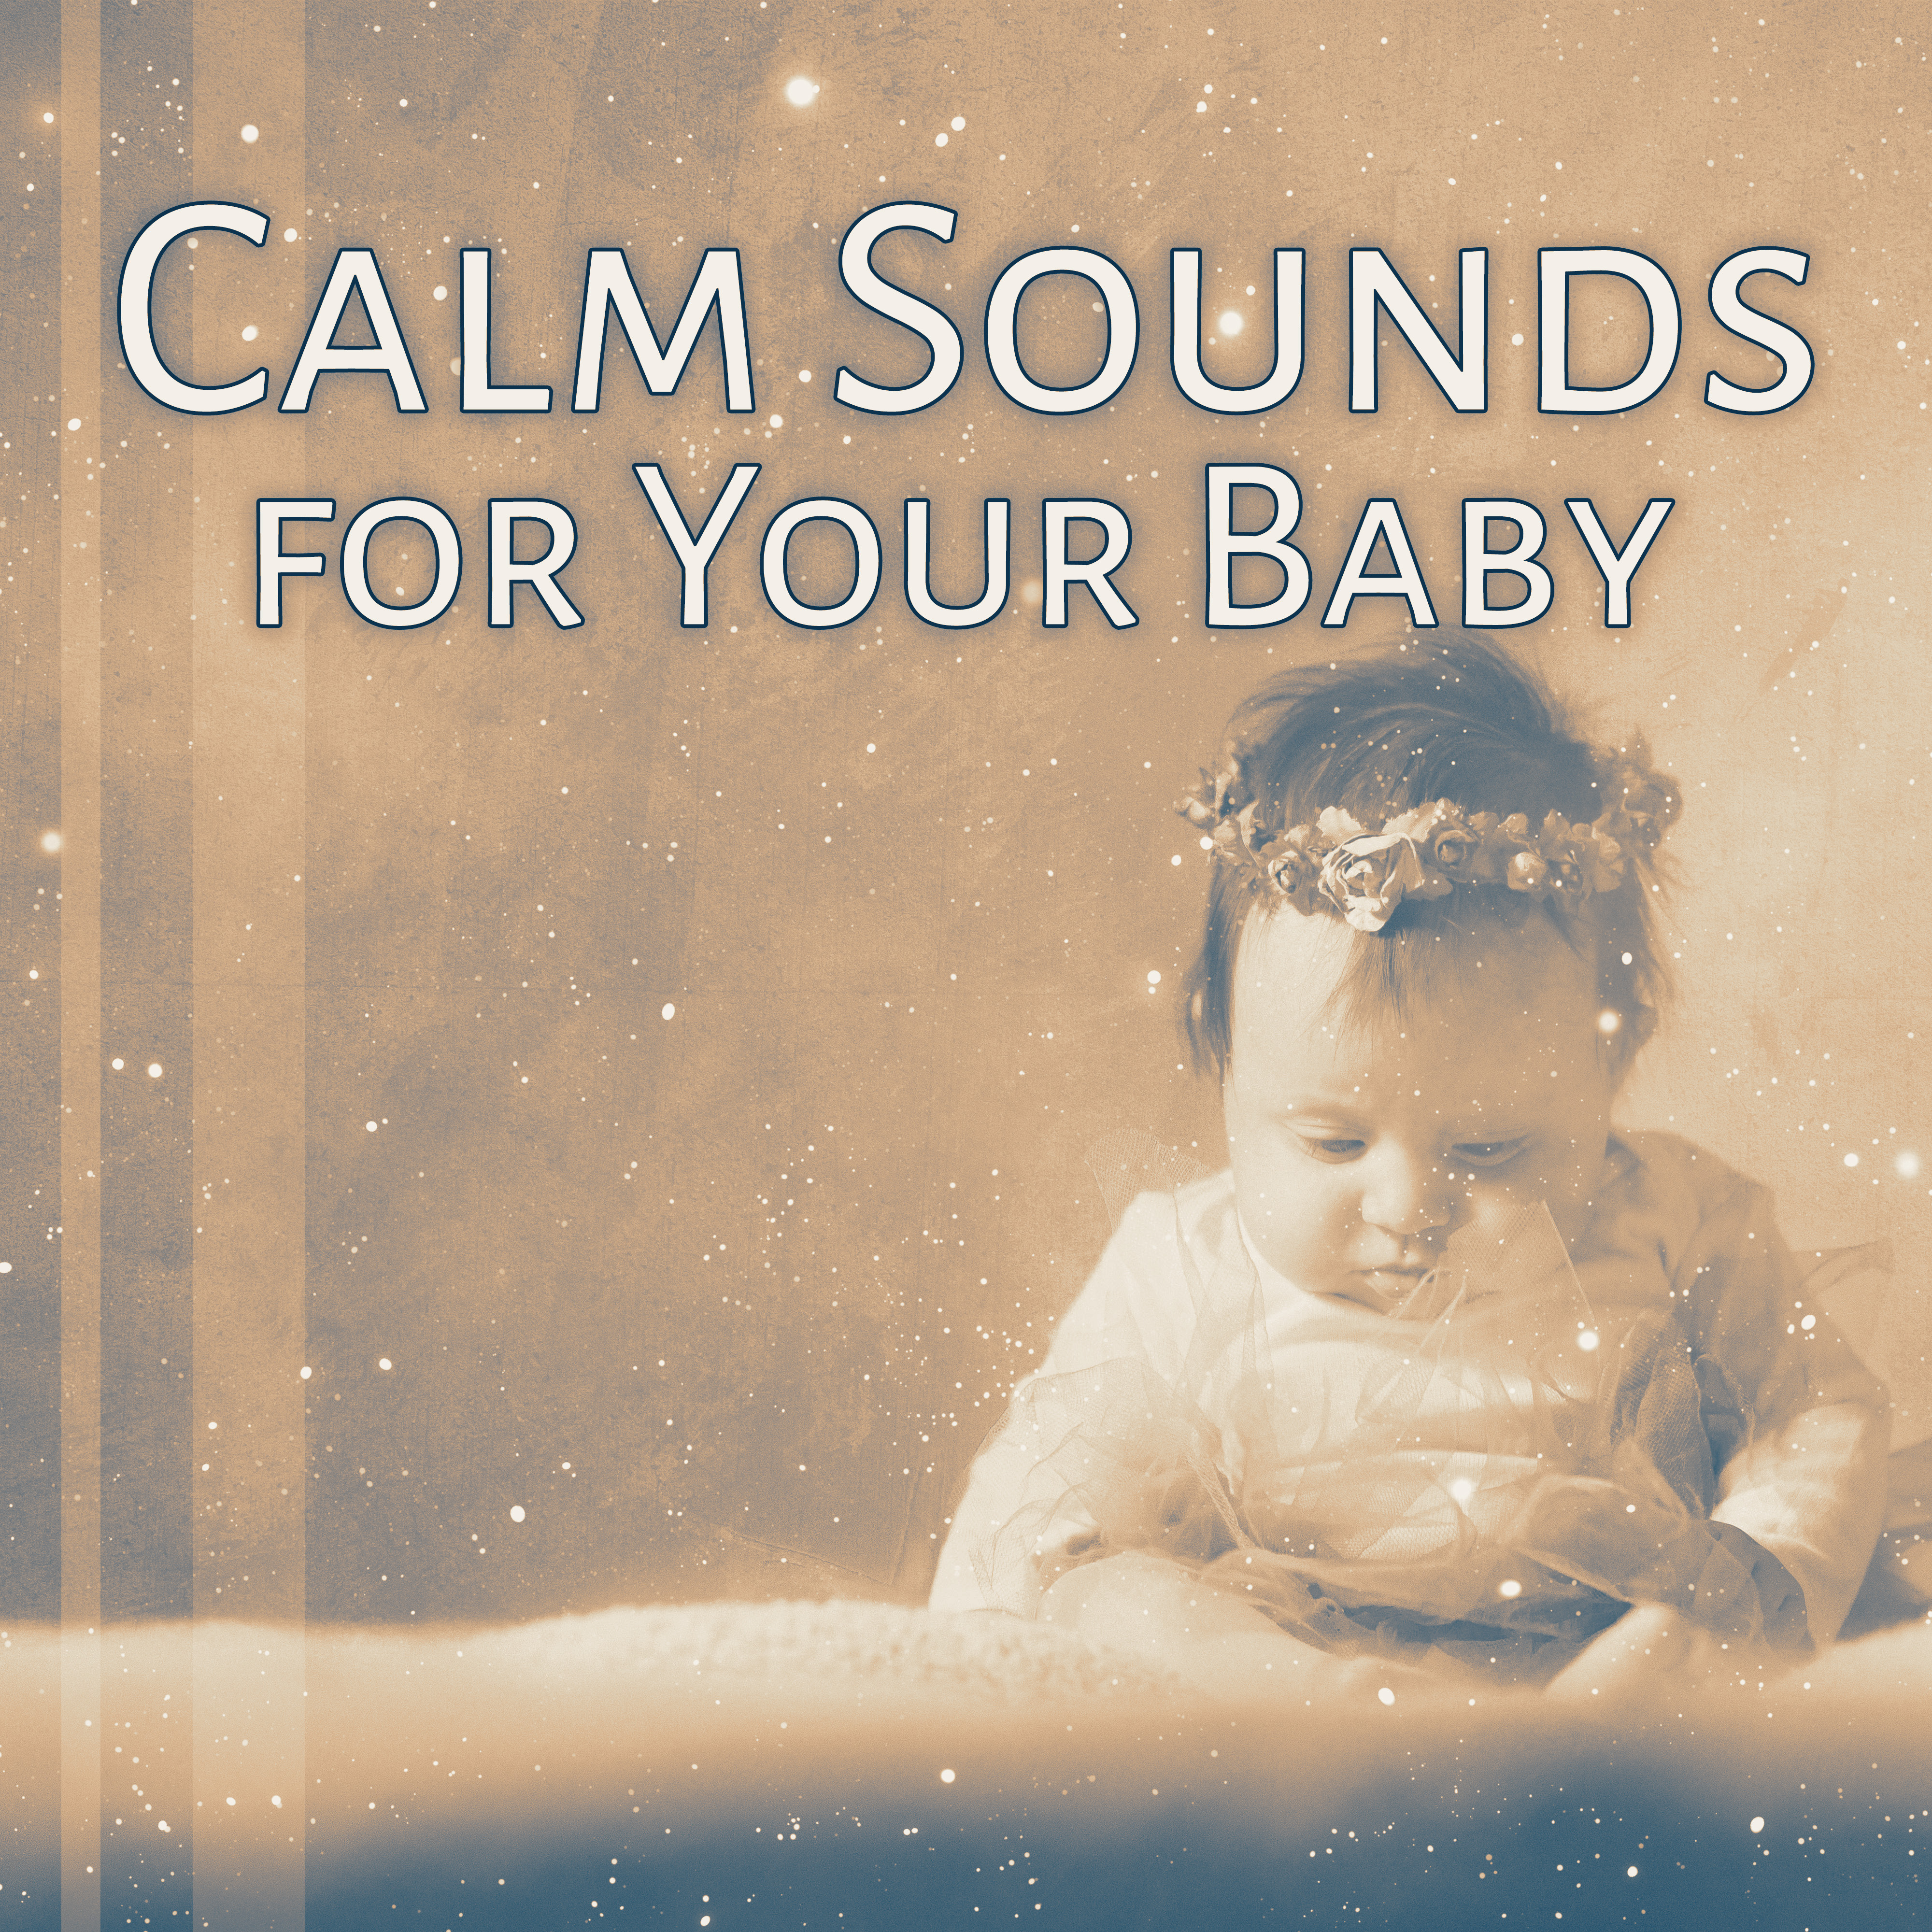 Calm Sounds for Your Baby  Chilled Sounds, Sleep All Night, Calm Evening, New Age Lullabies